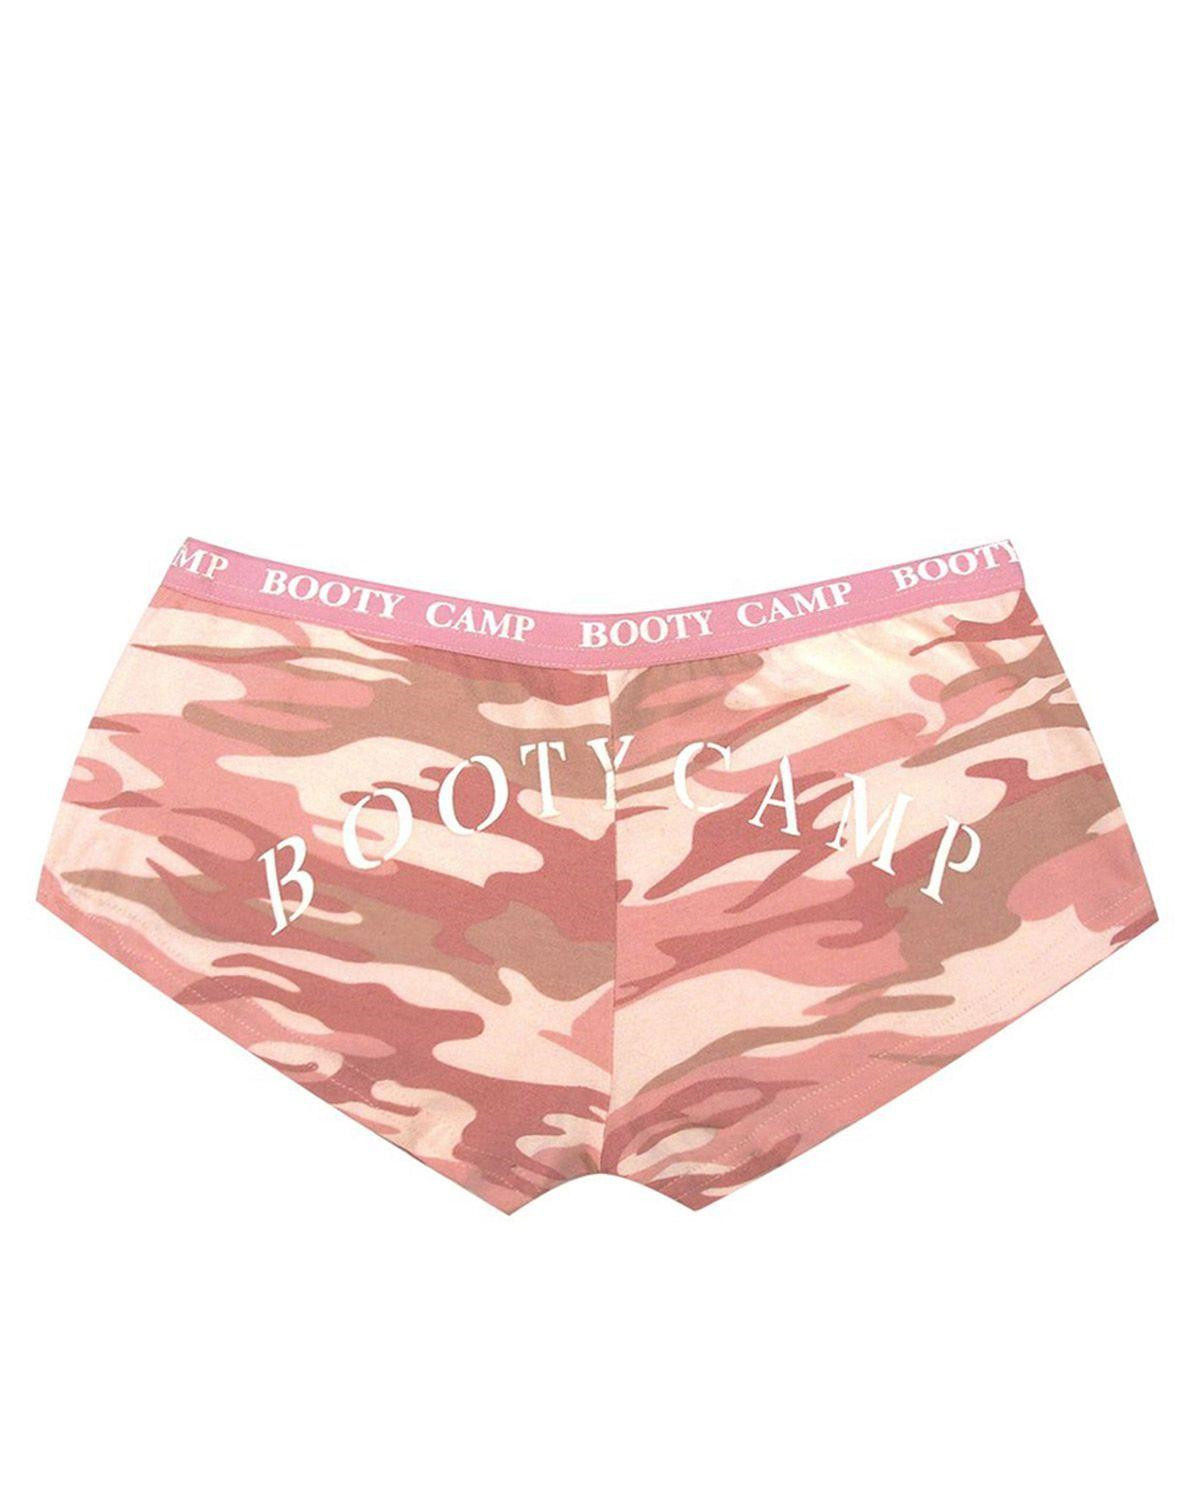 6: Rothco Trusser - 'Booty Camp' (Pink Camo, L)